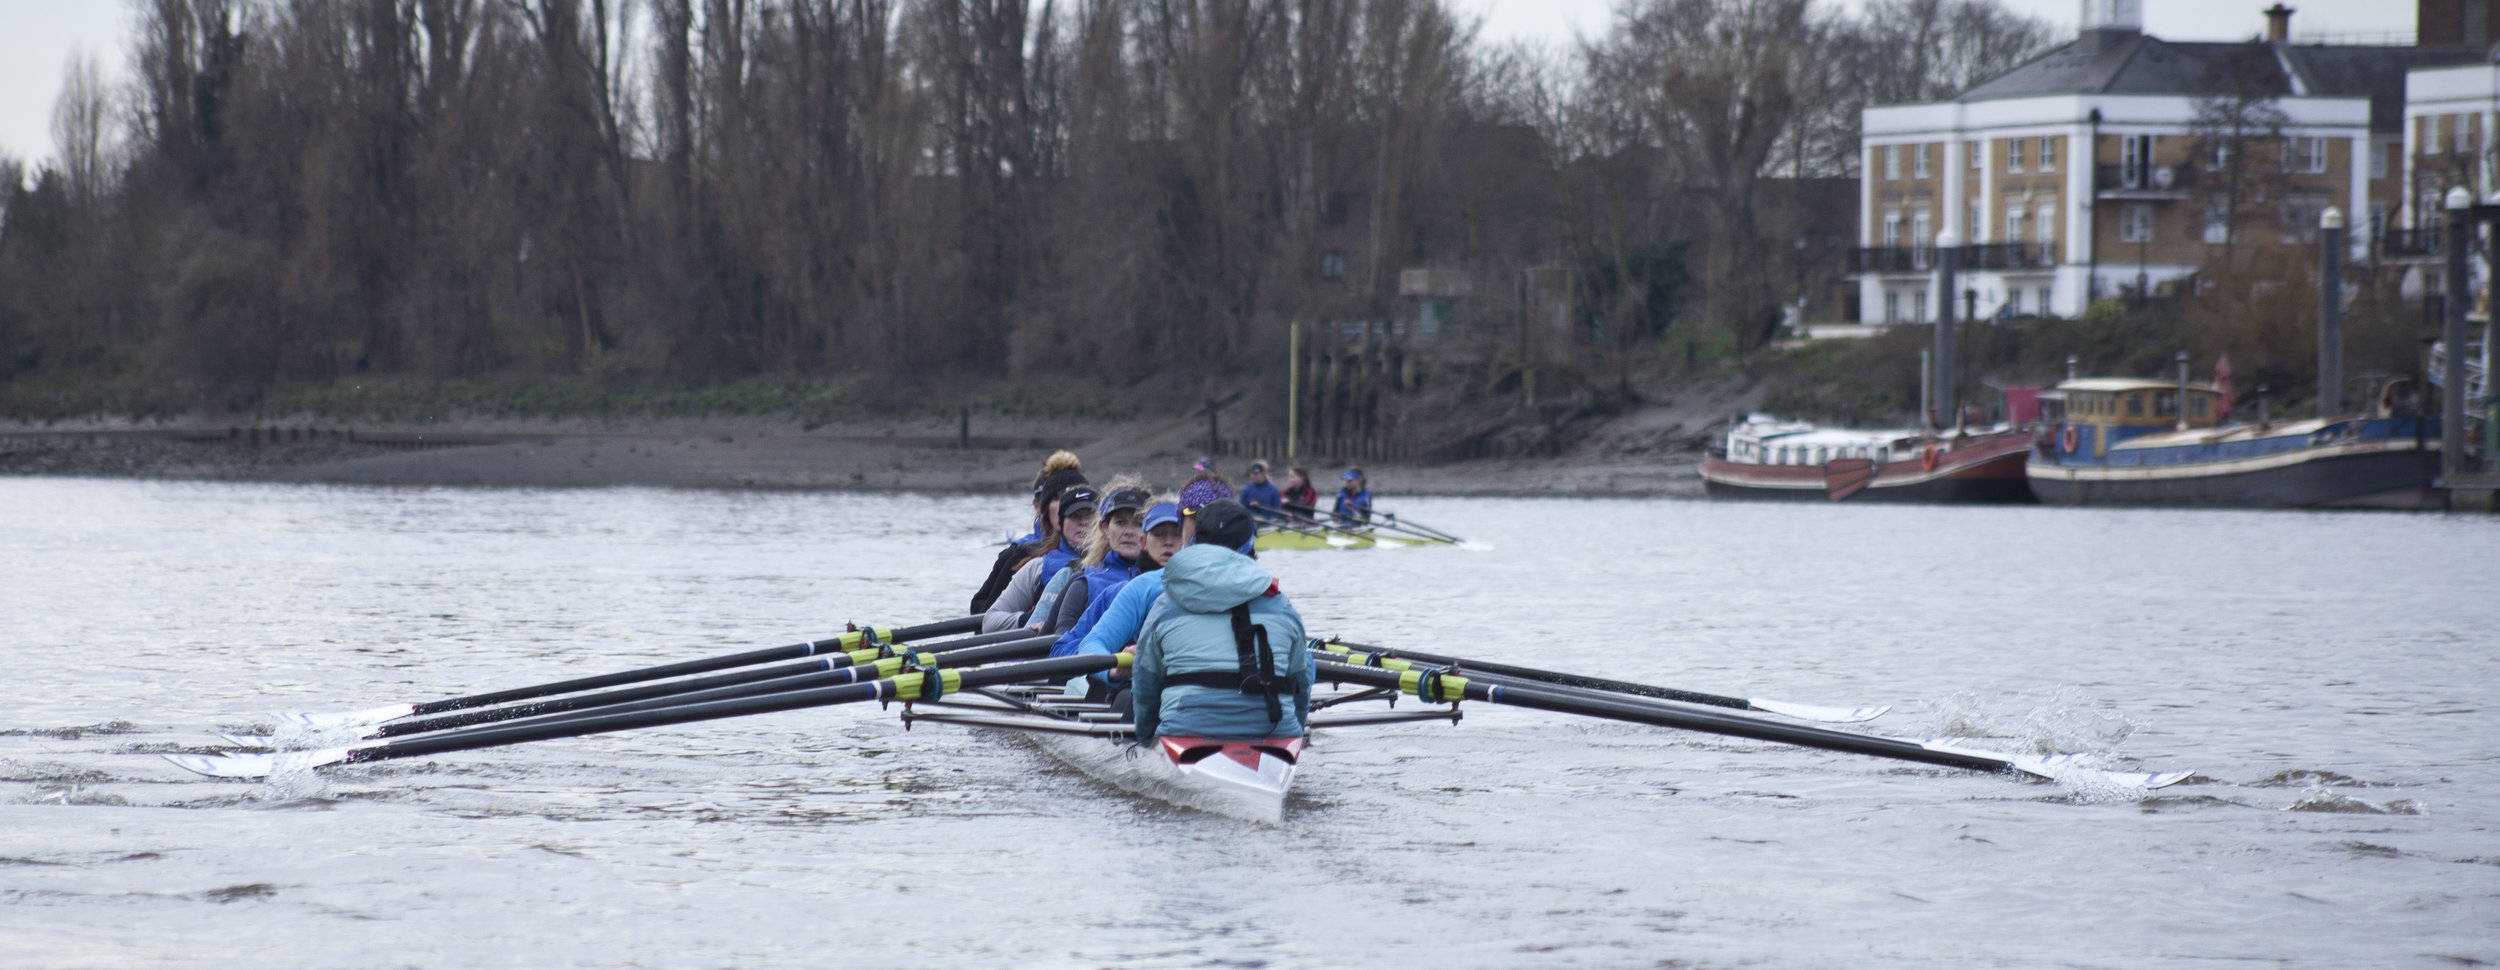 Crewroom Pogies Sculling and Rowing 